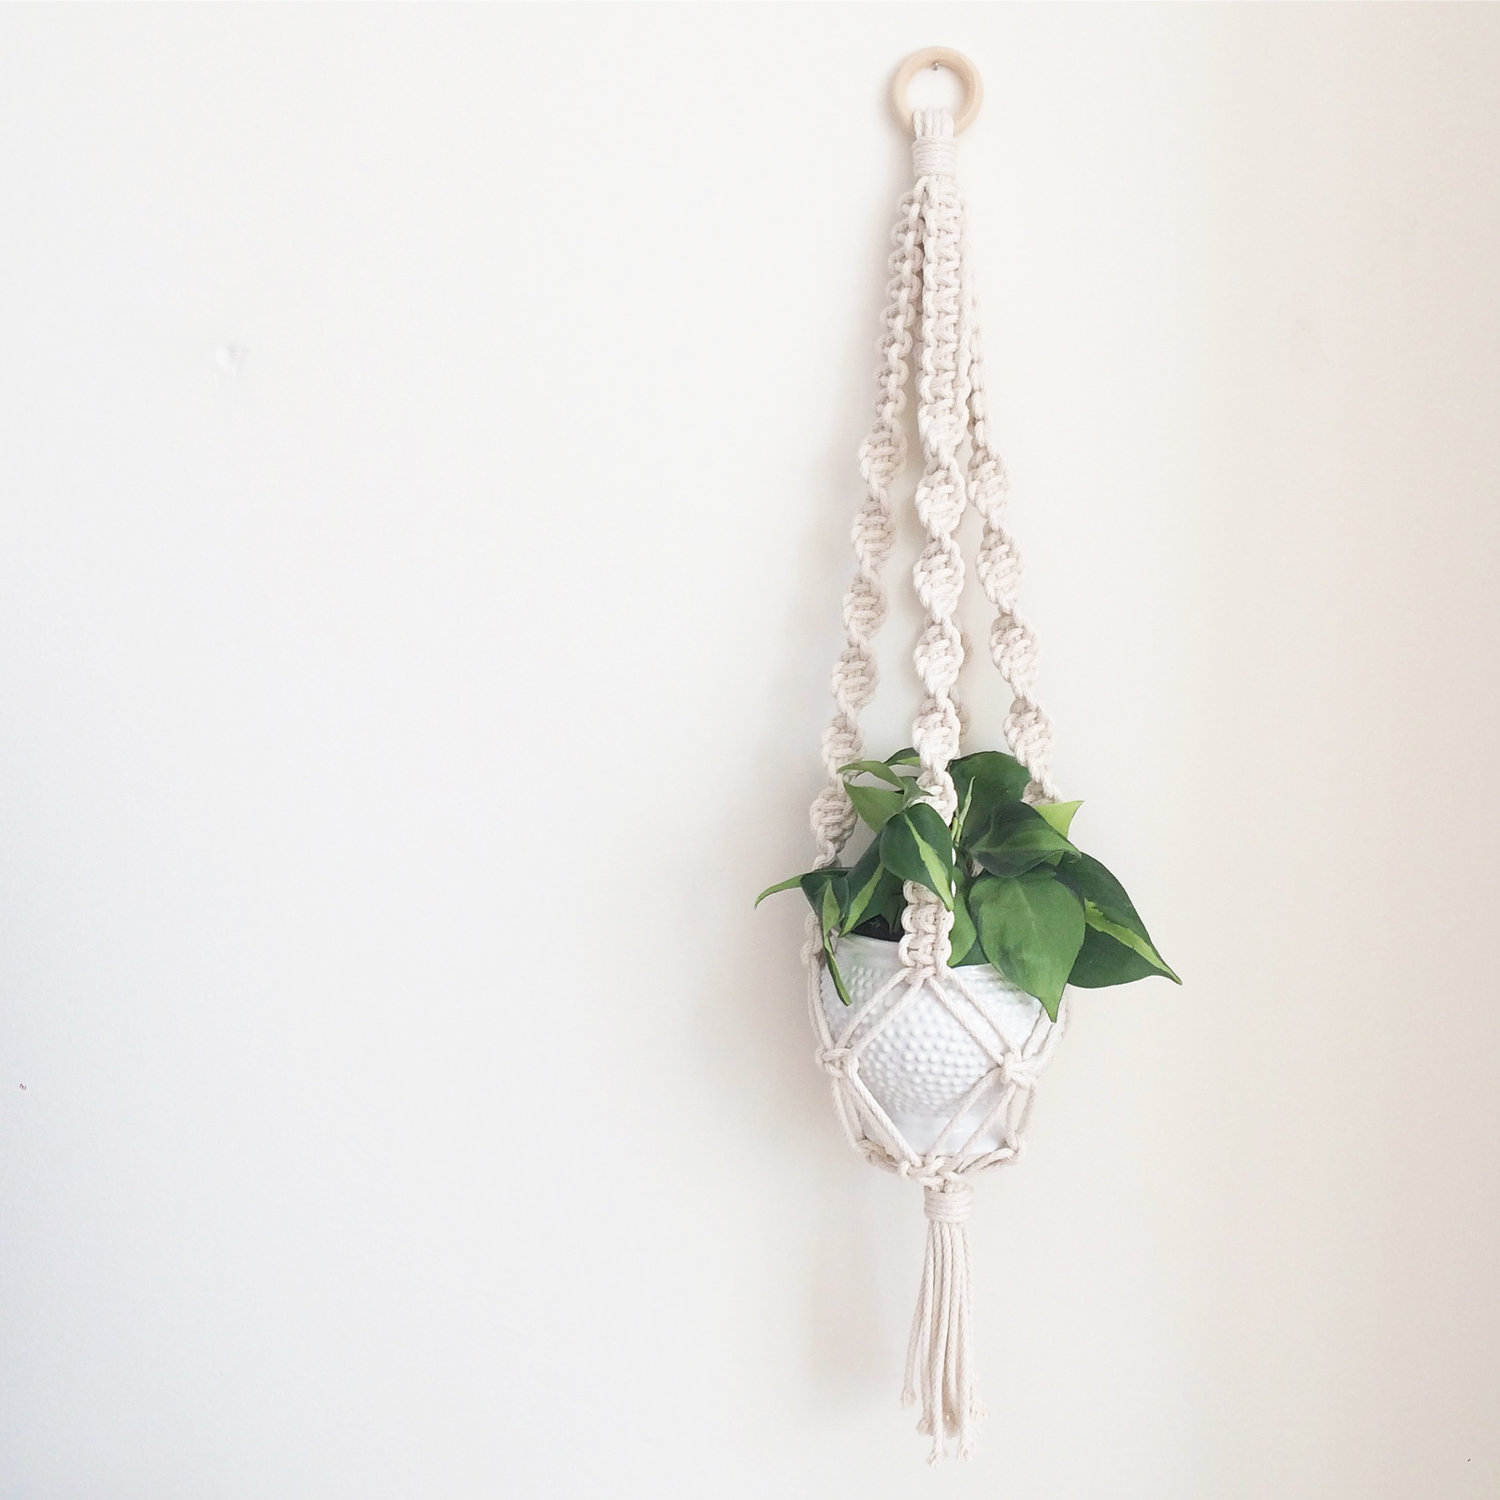 Introducing our macrame plant hanger kit — Cosy Craft Club